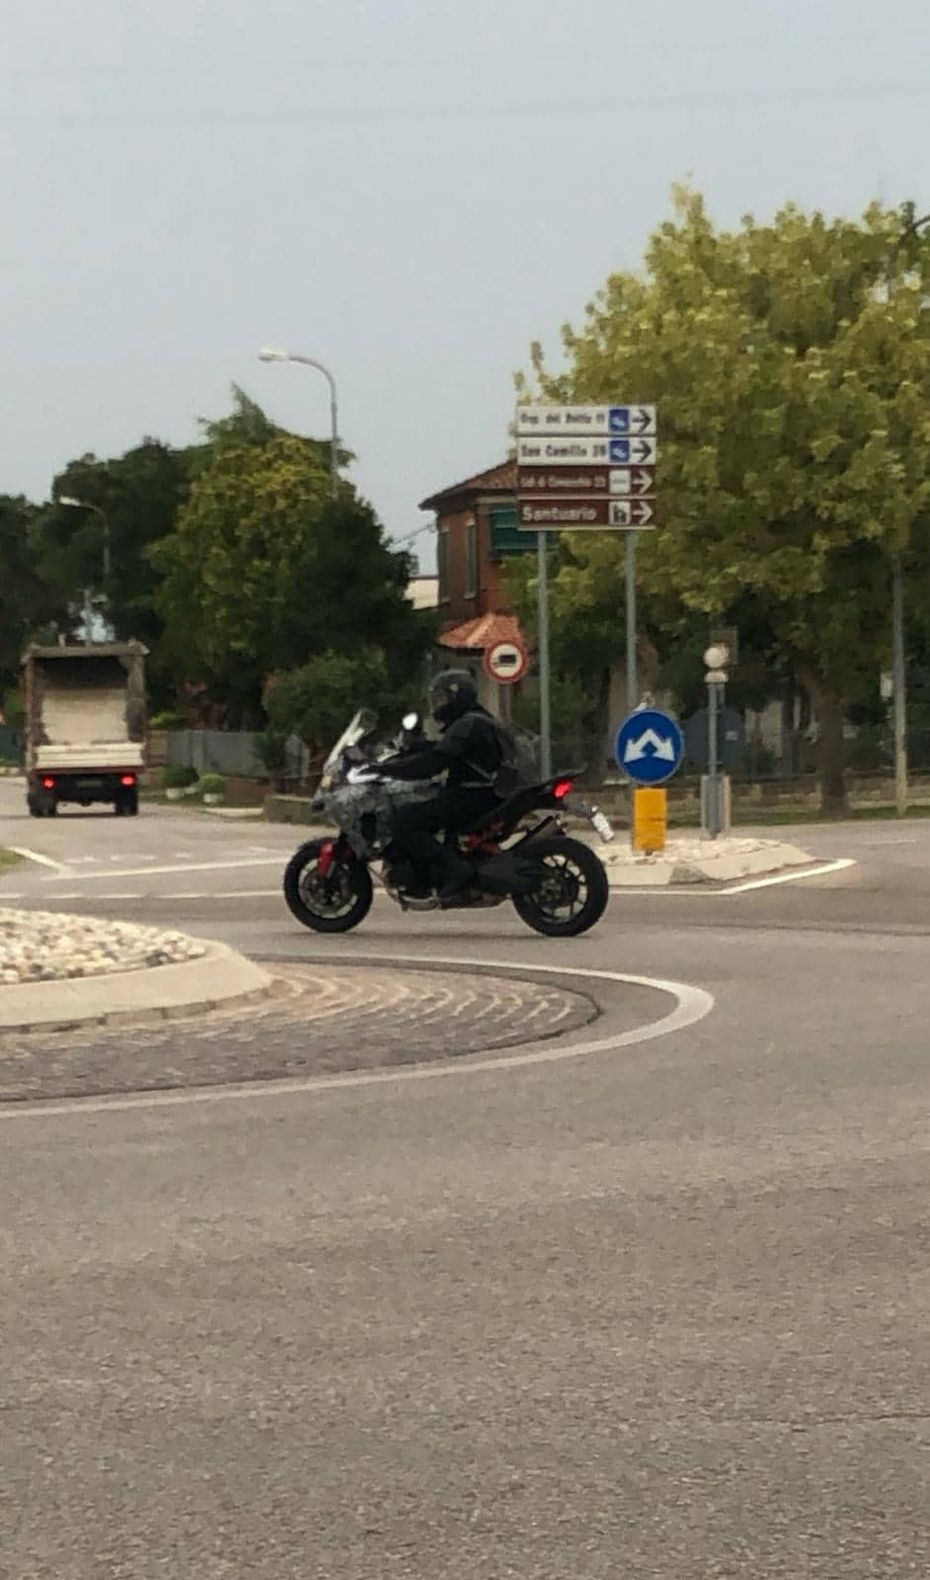 V4-powered Ducati Multistrada Spied For The First Time!